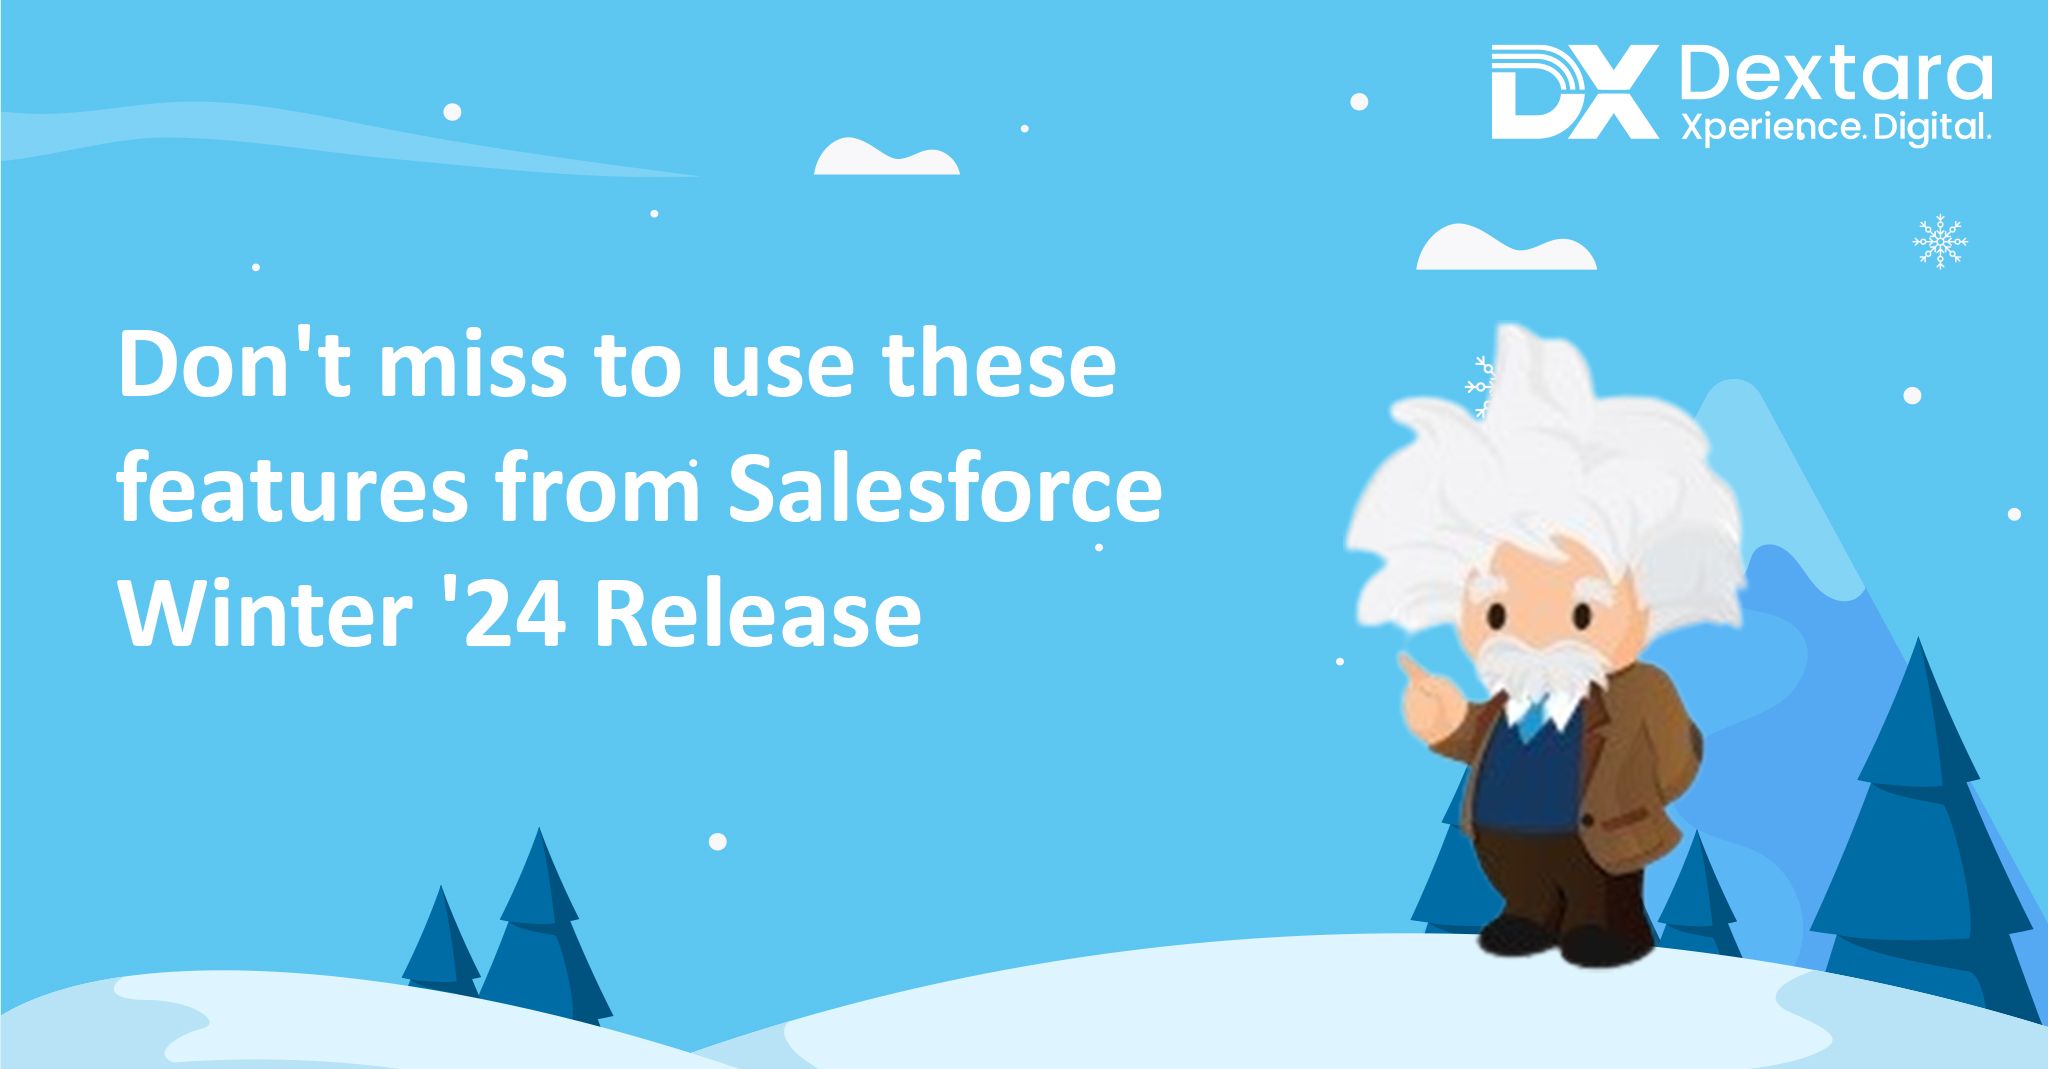 Don’t miss to use these features from Salesforce Winter ’24 Release